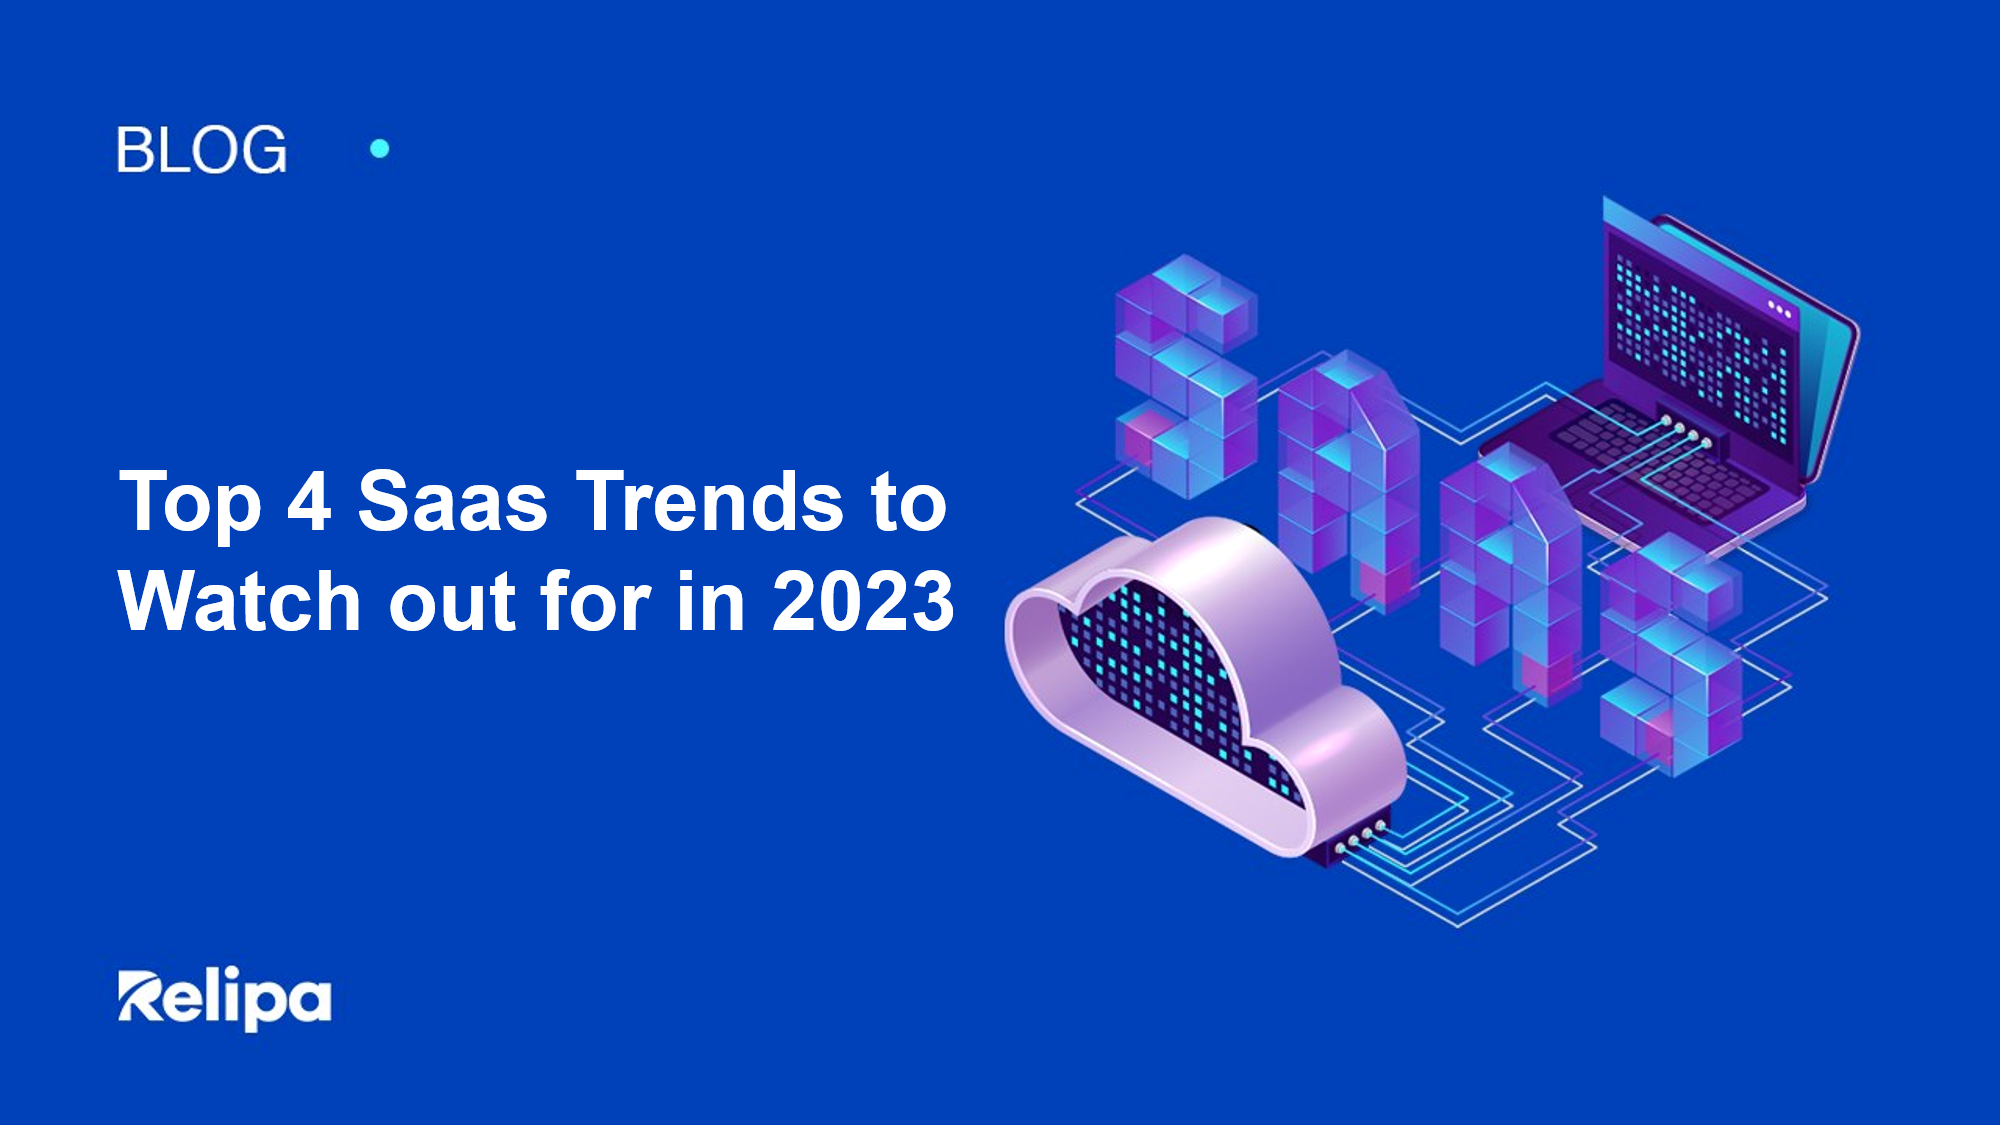 Top 4 SaaS Trends to Watch Out For in 2023